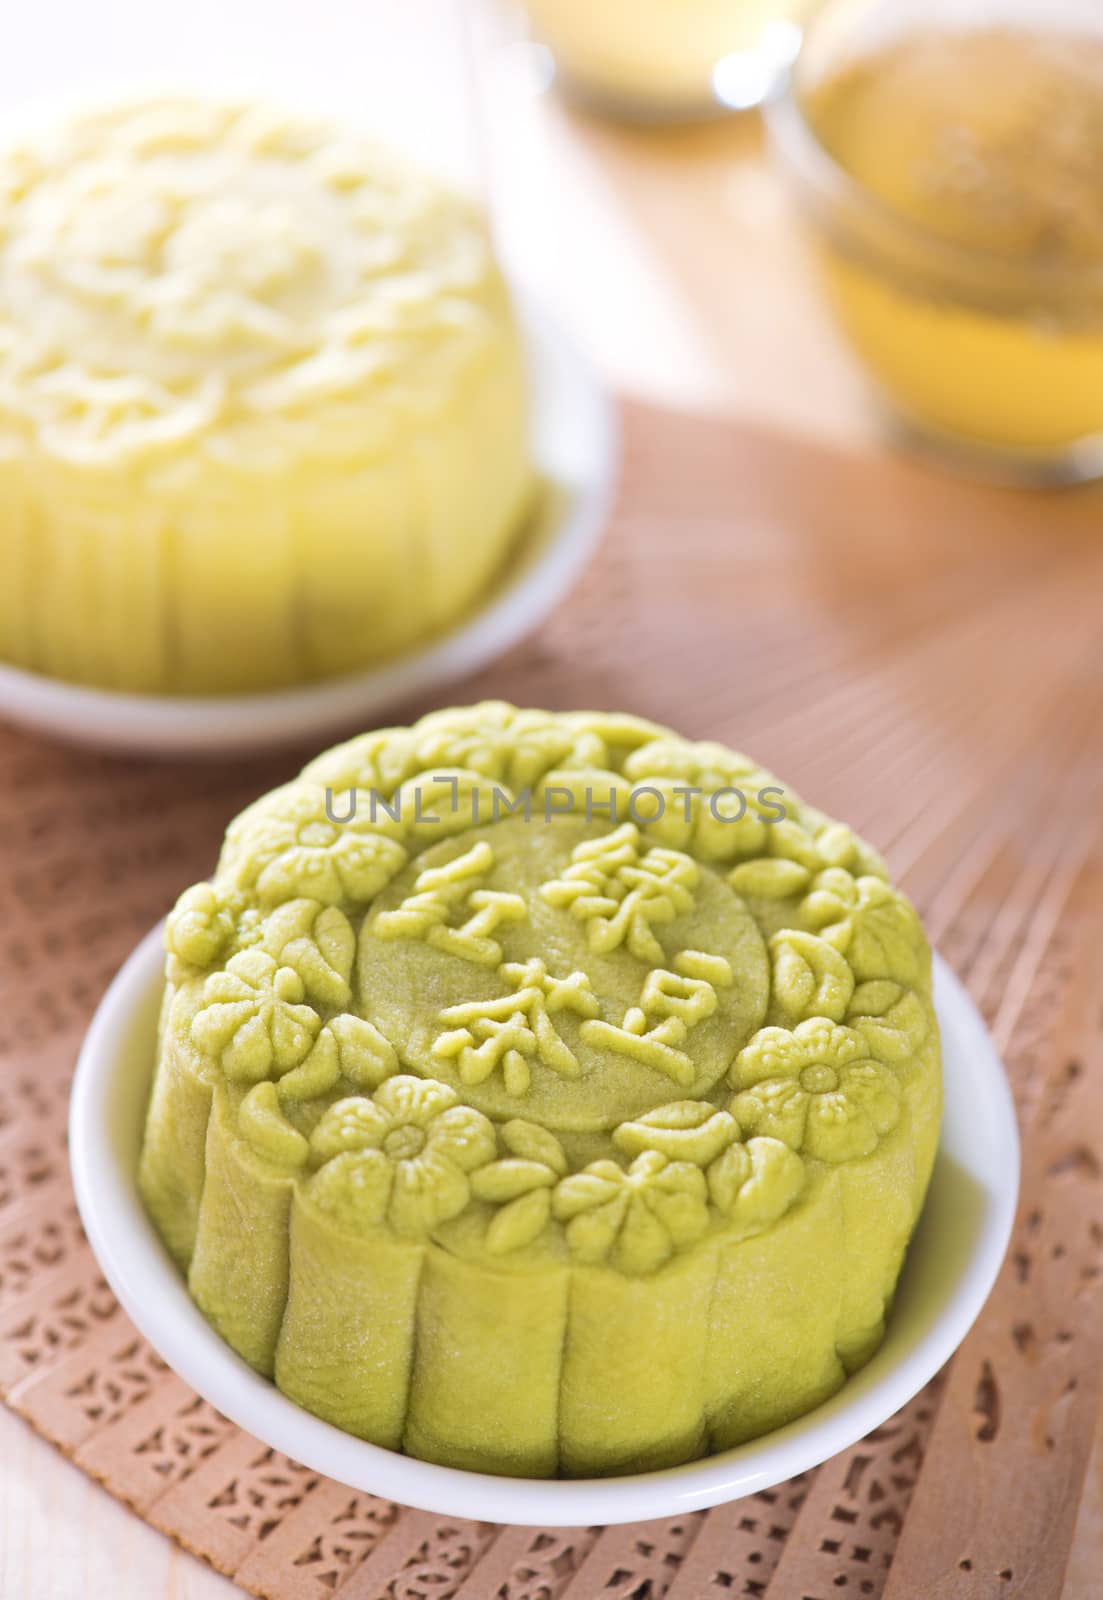 Snowy skin mooncakes.  Traditional Chinese mid autumn festival food. The Chinese words on the mooncakes means green tea with red bean paste and lotus paste, not a logo or trademark.